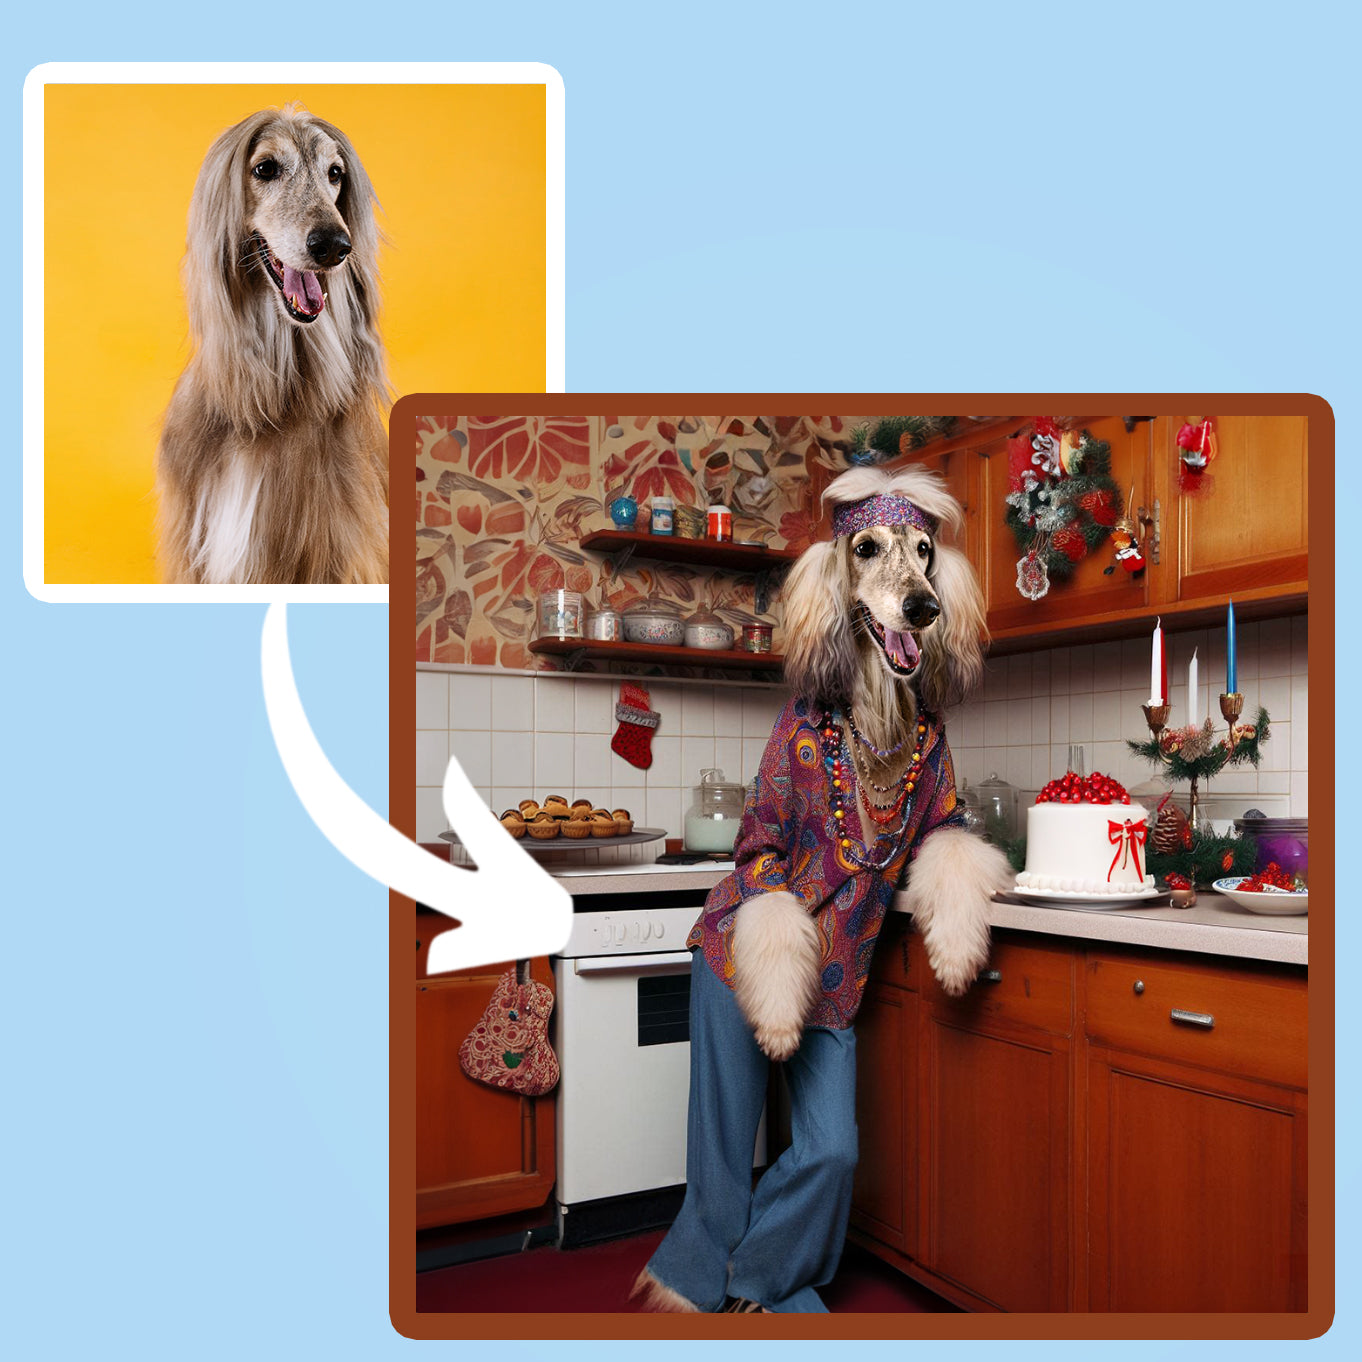 A reto pet portrait 1960s afghan dog standing like a human in a Christmas kitchen scene